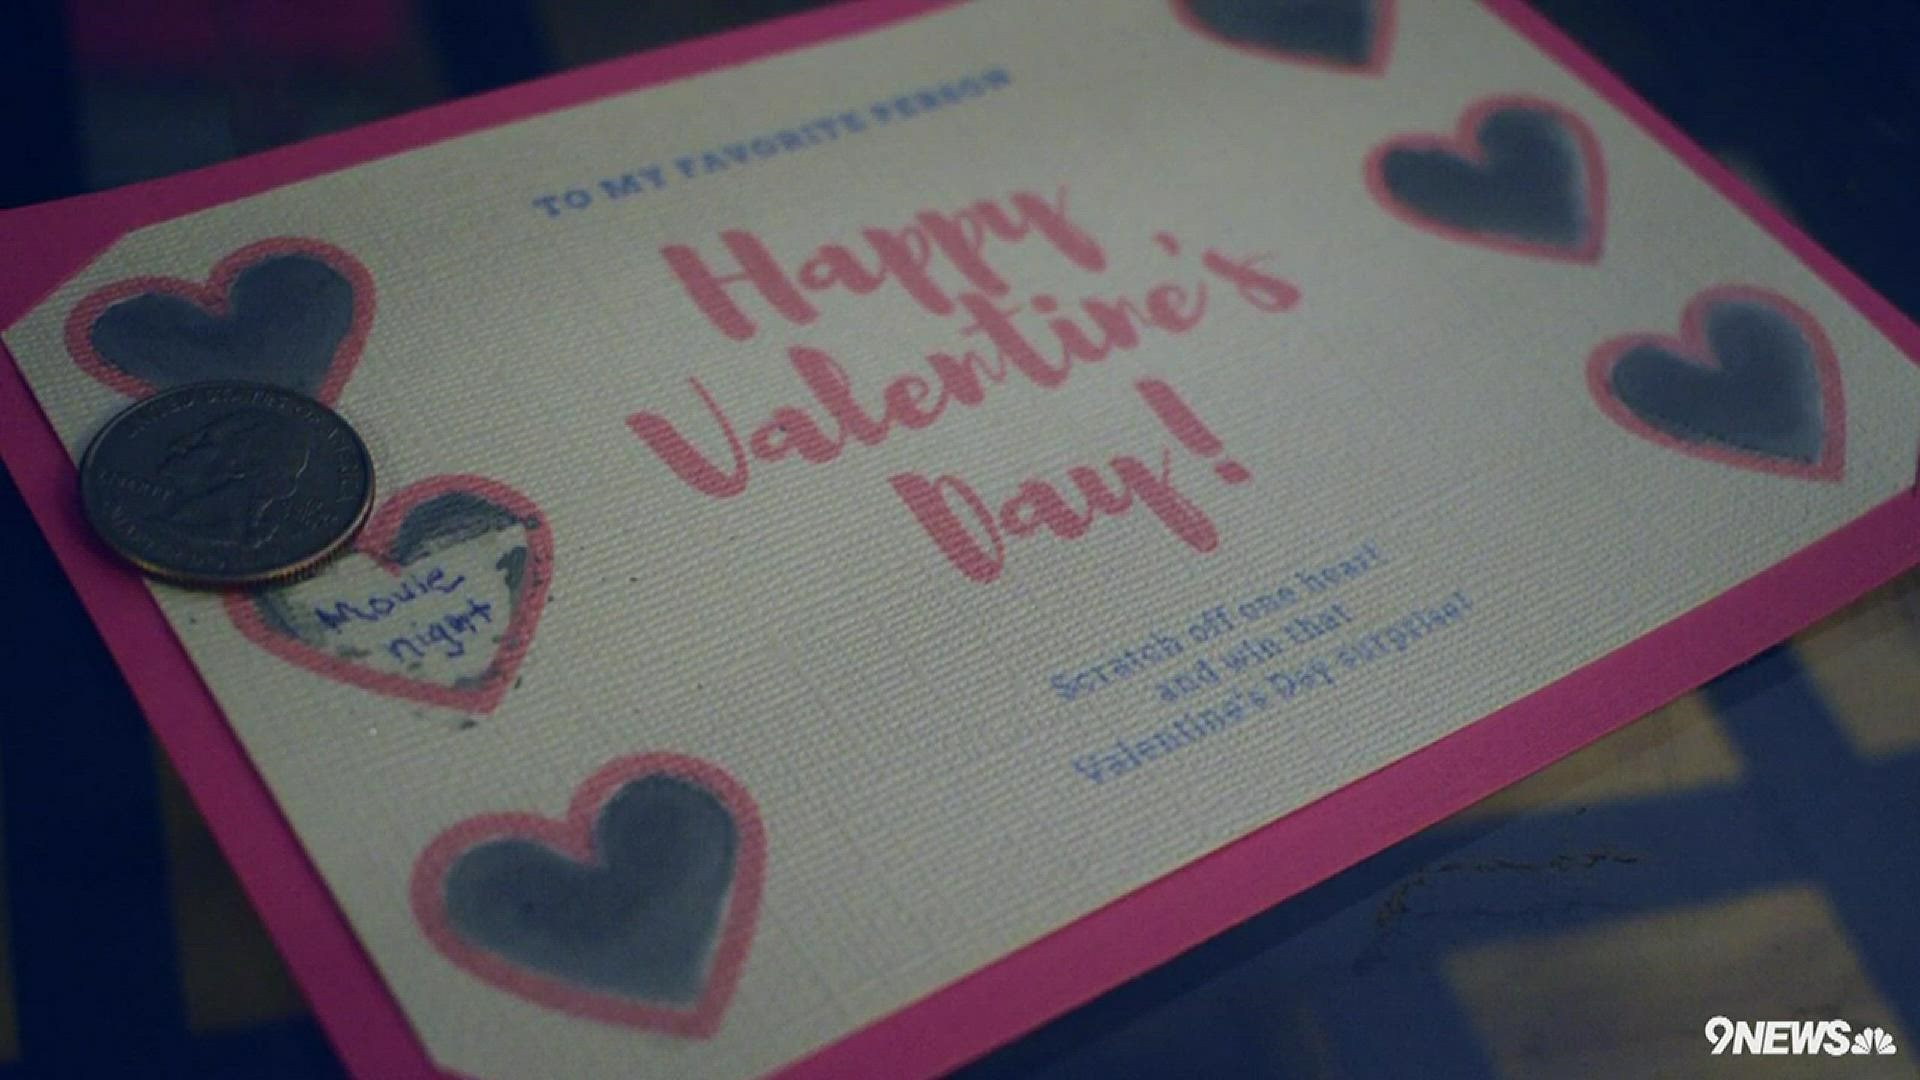 Need a last minute Valentine's Day gift? Make these cute and creative scratch-off cards for your loved one.